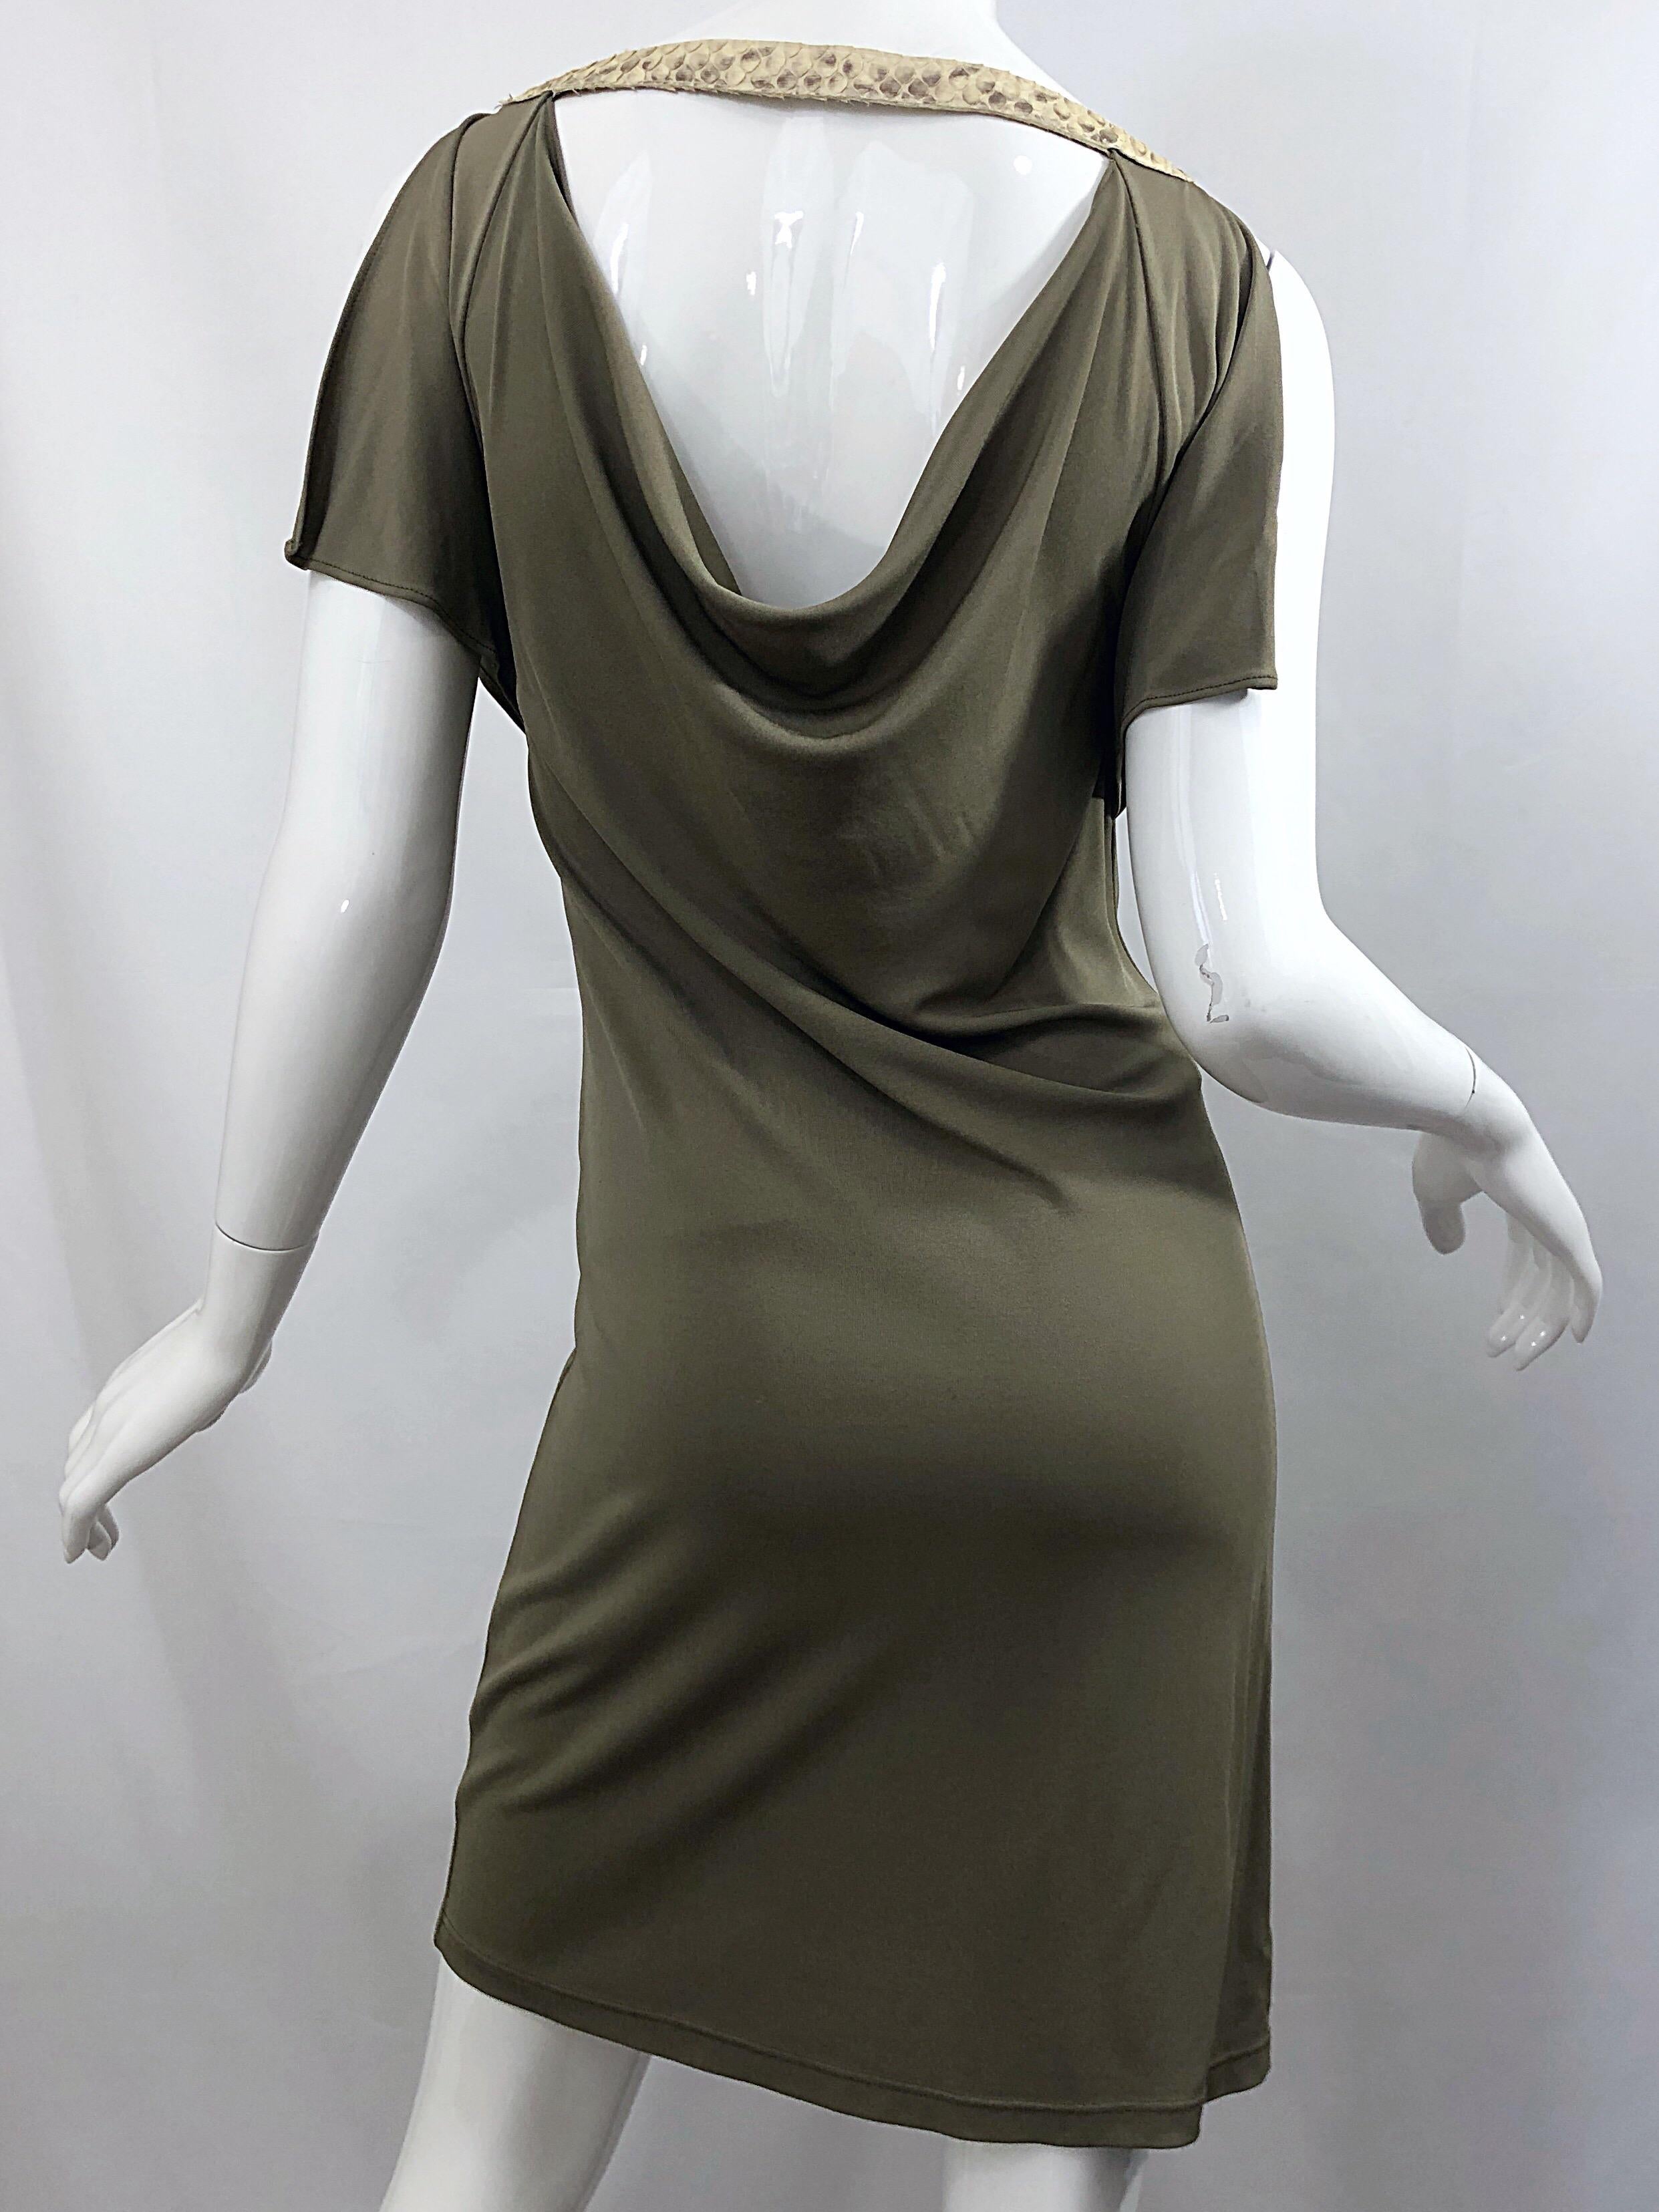 Michael Kors Collection Size 6 Taupe Rayon Jersey + Python Cold Shoulder Dress For Sale 3